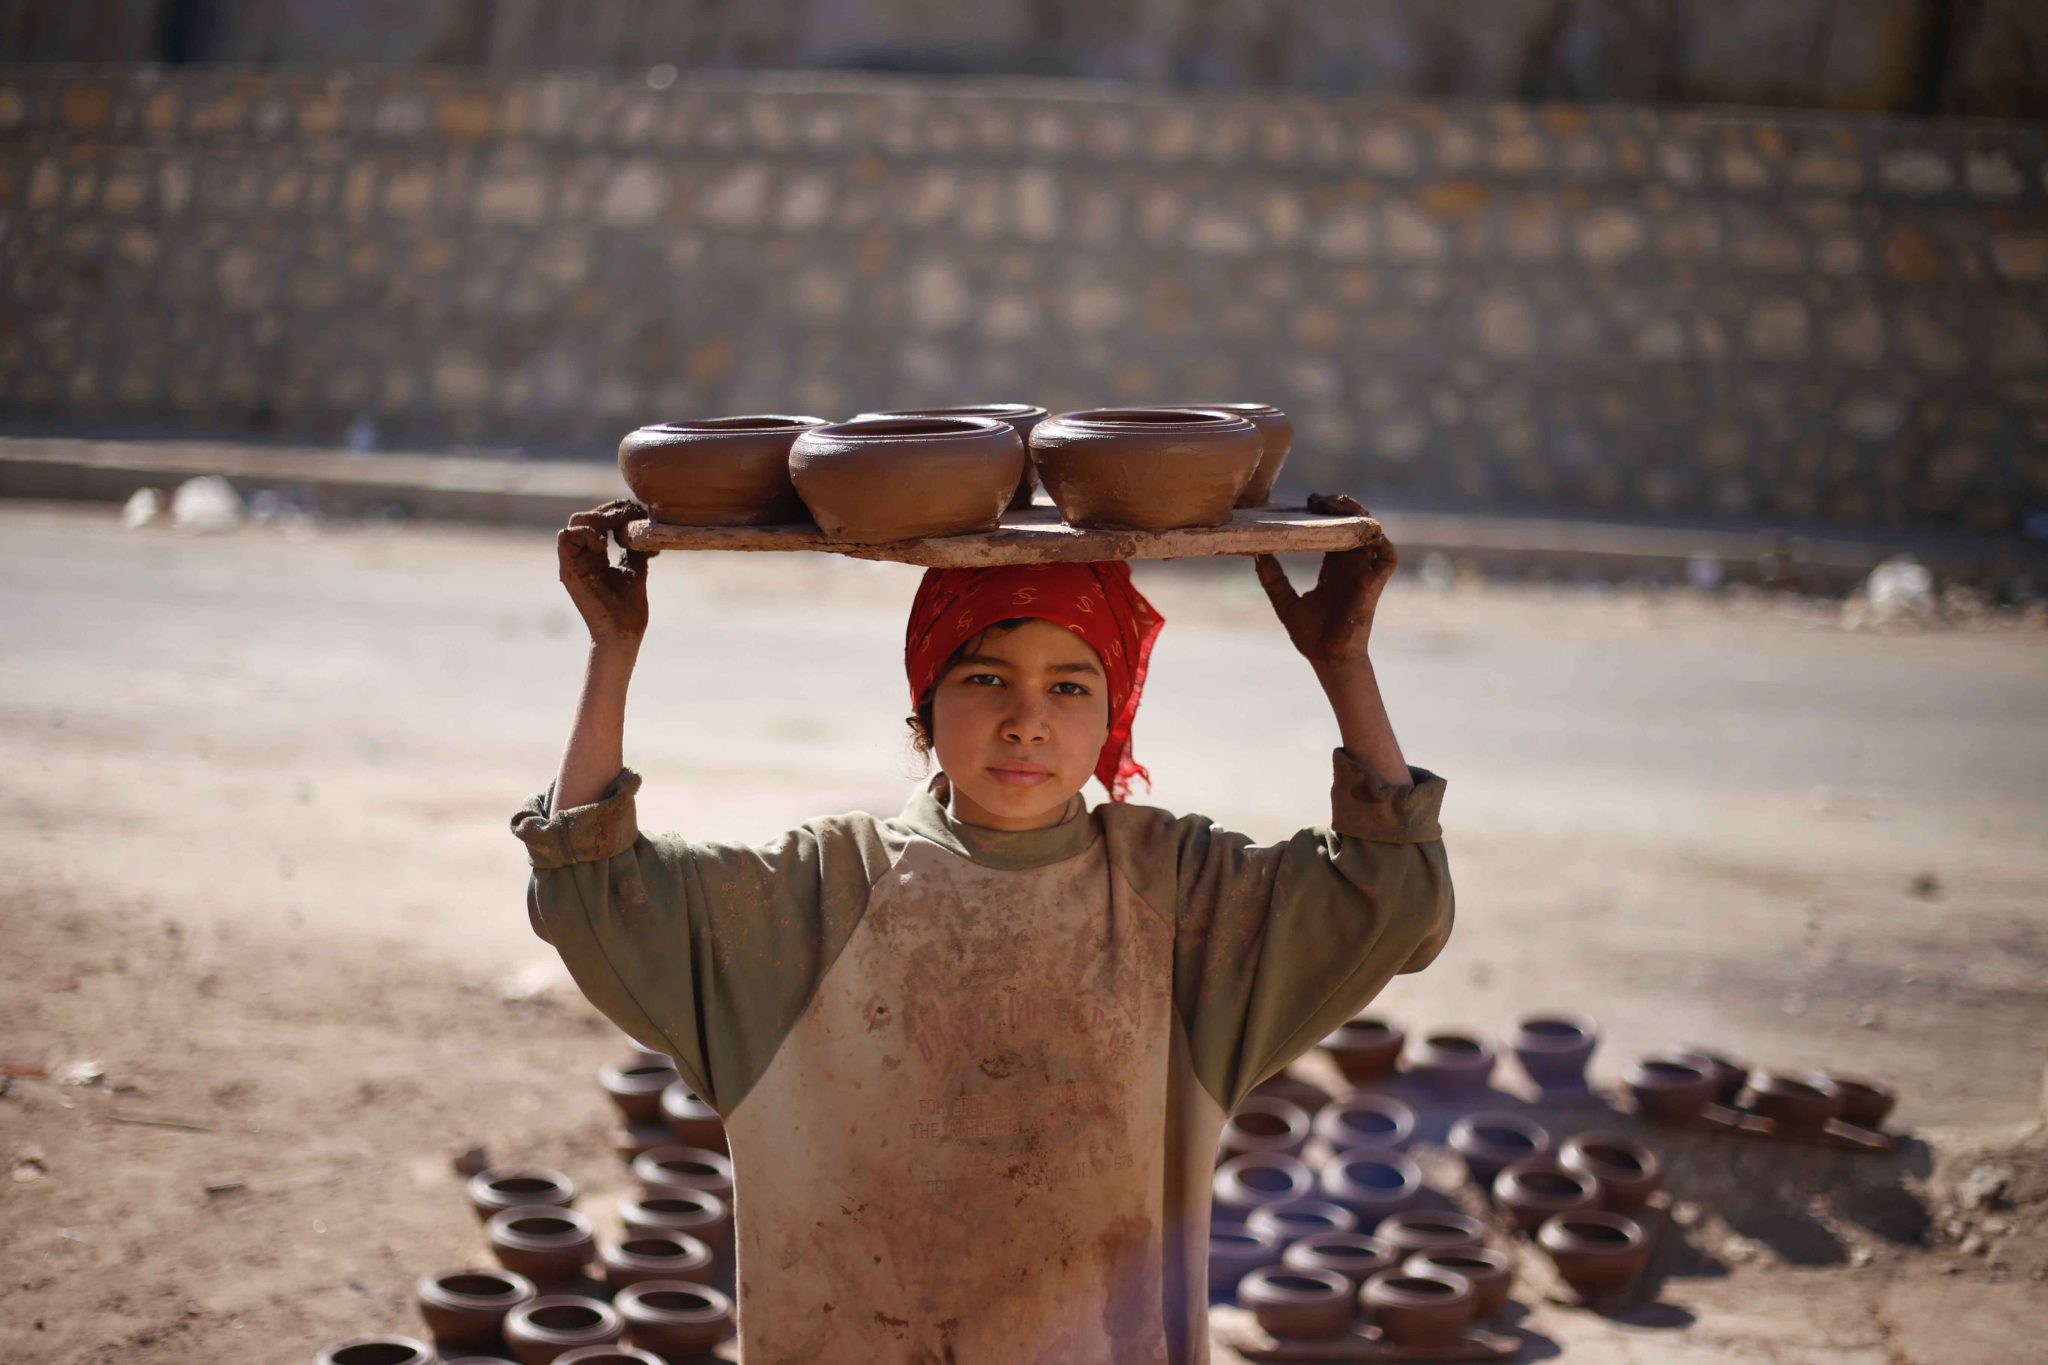 A woman carrying a tray on her head of bowls in Egypt